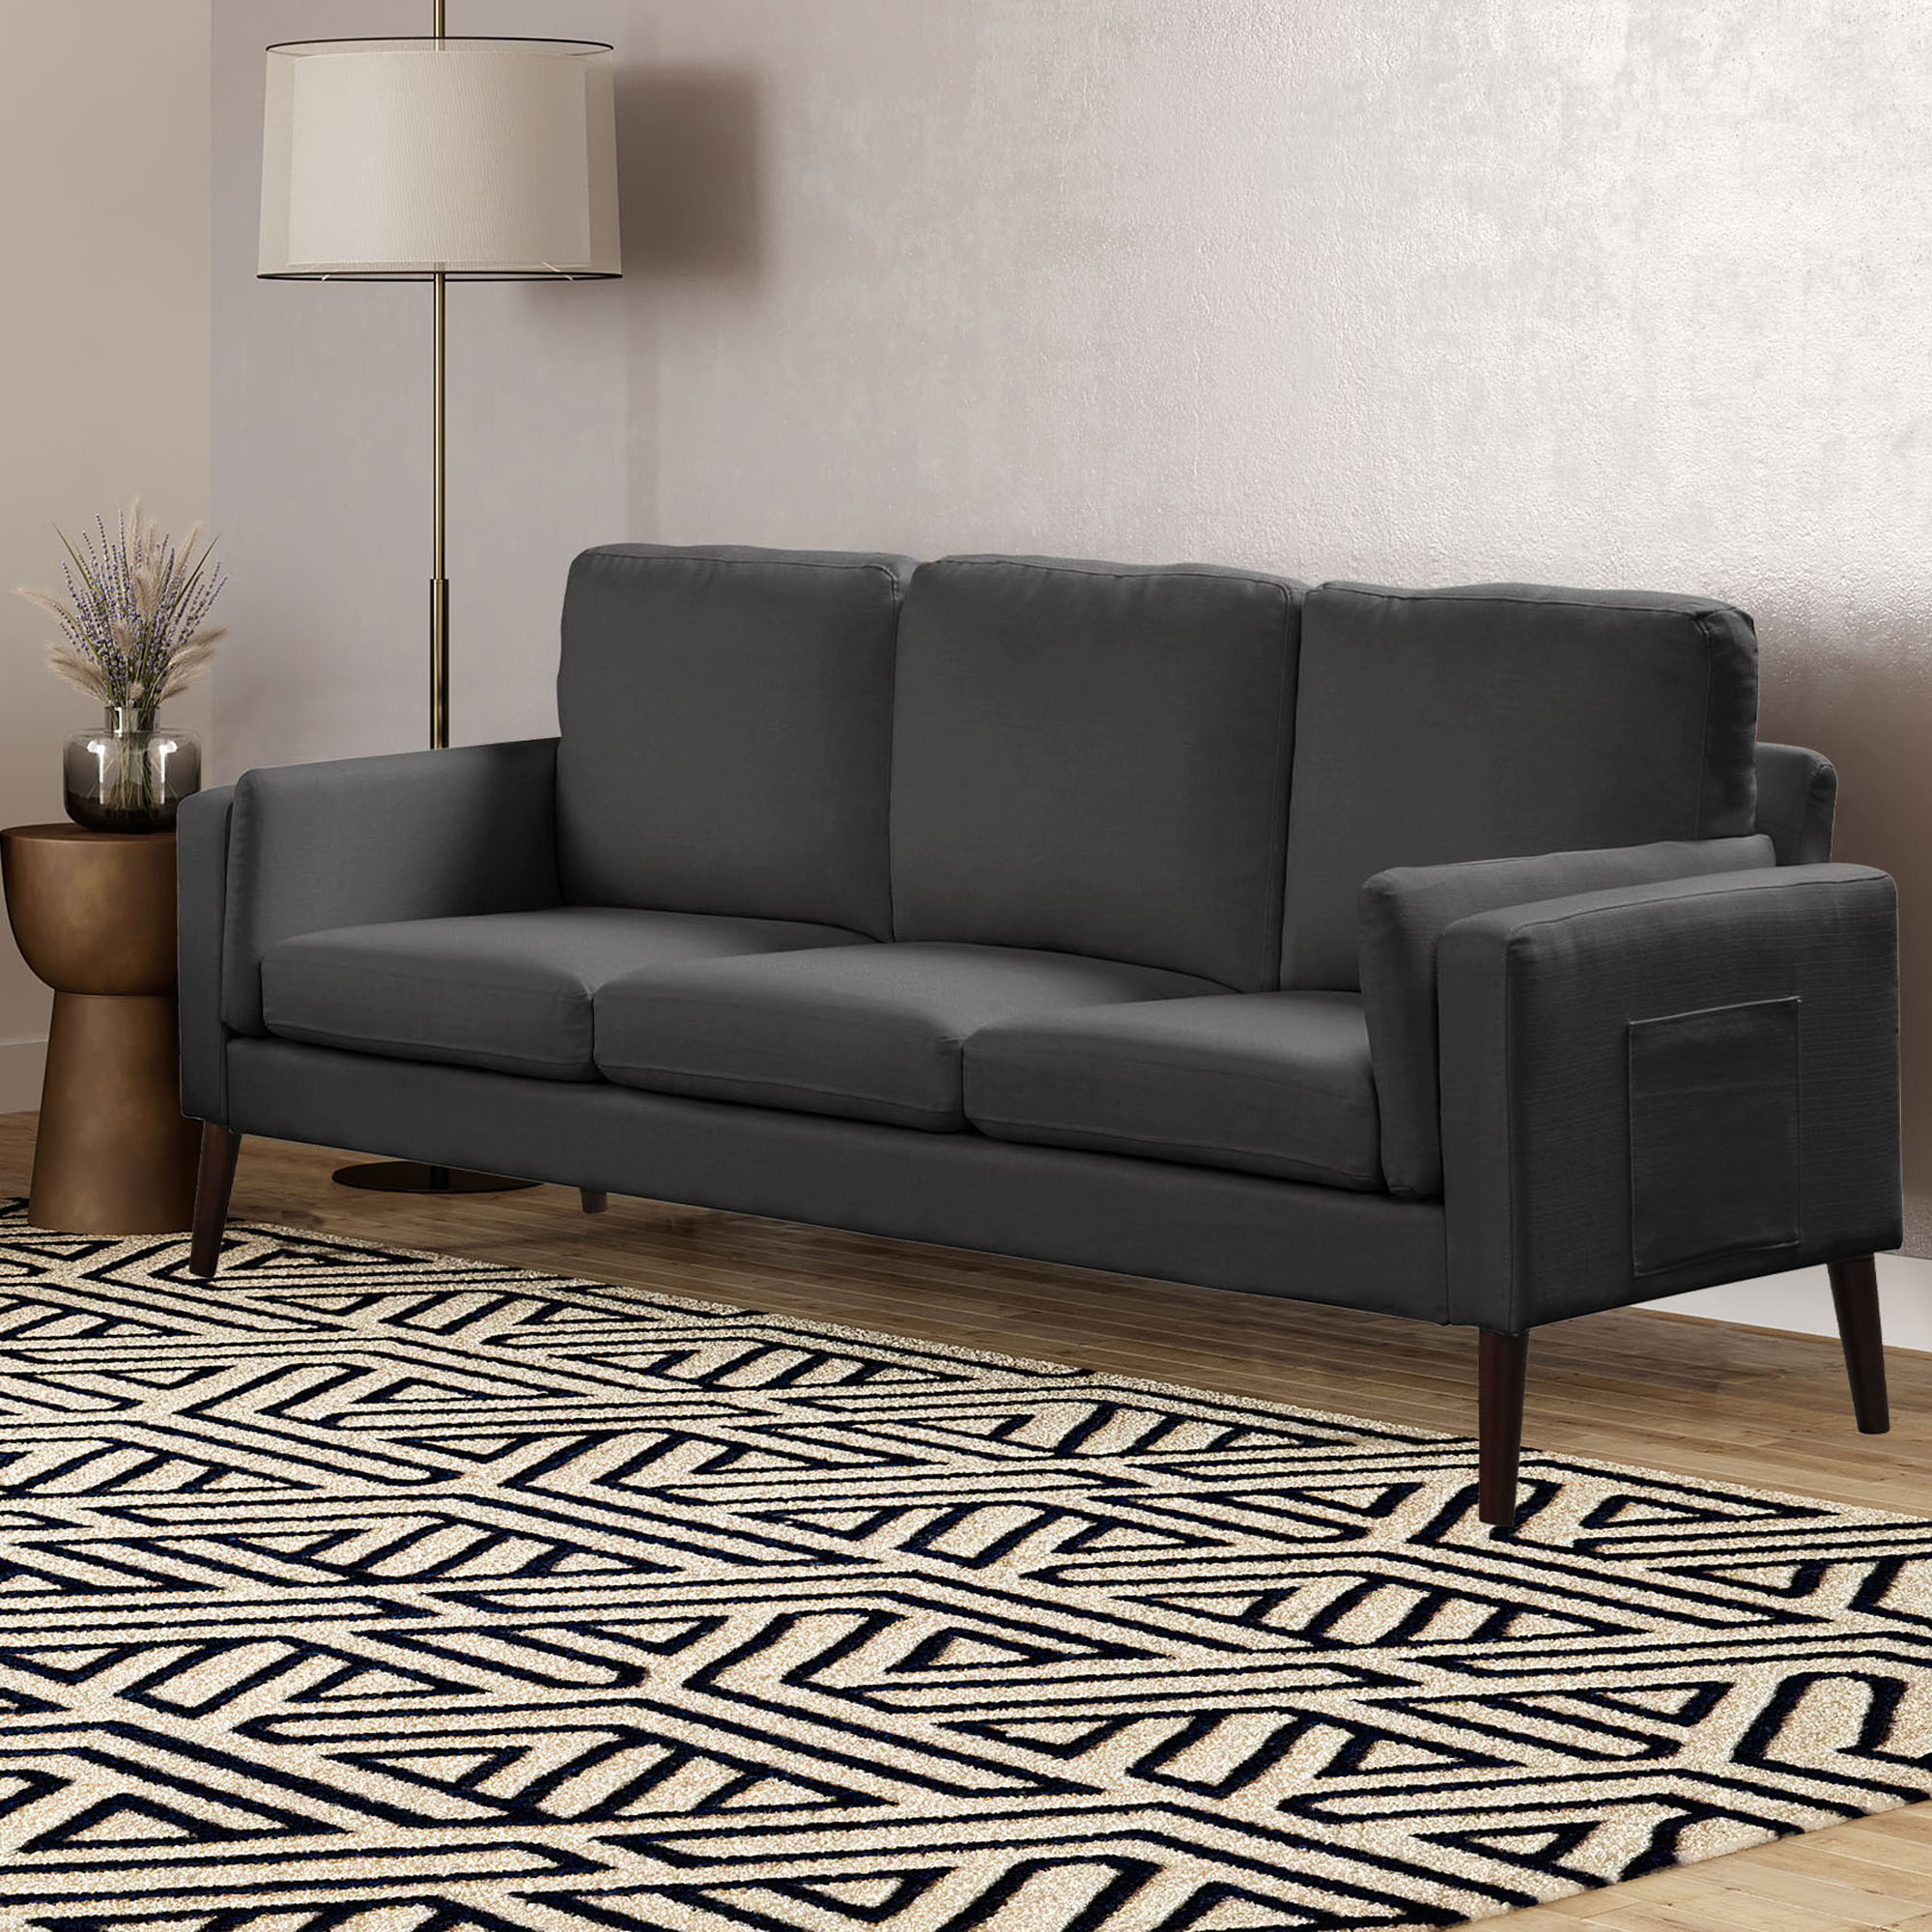 Elm & Oak Nathaniel Modern Sofa with Side Pocket and USB Power, Black Fabric Upholstery - image 2 of 10